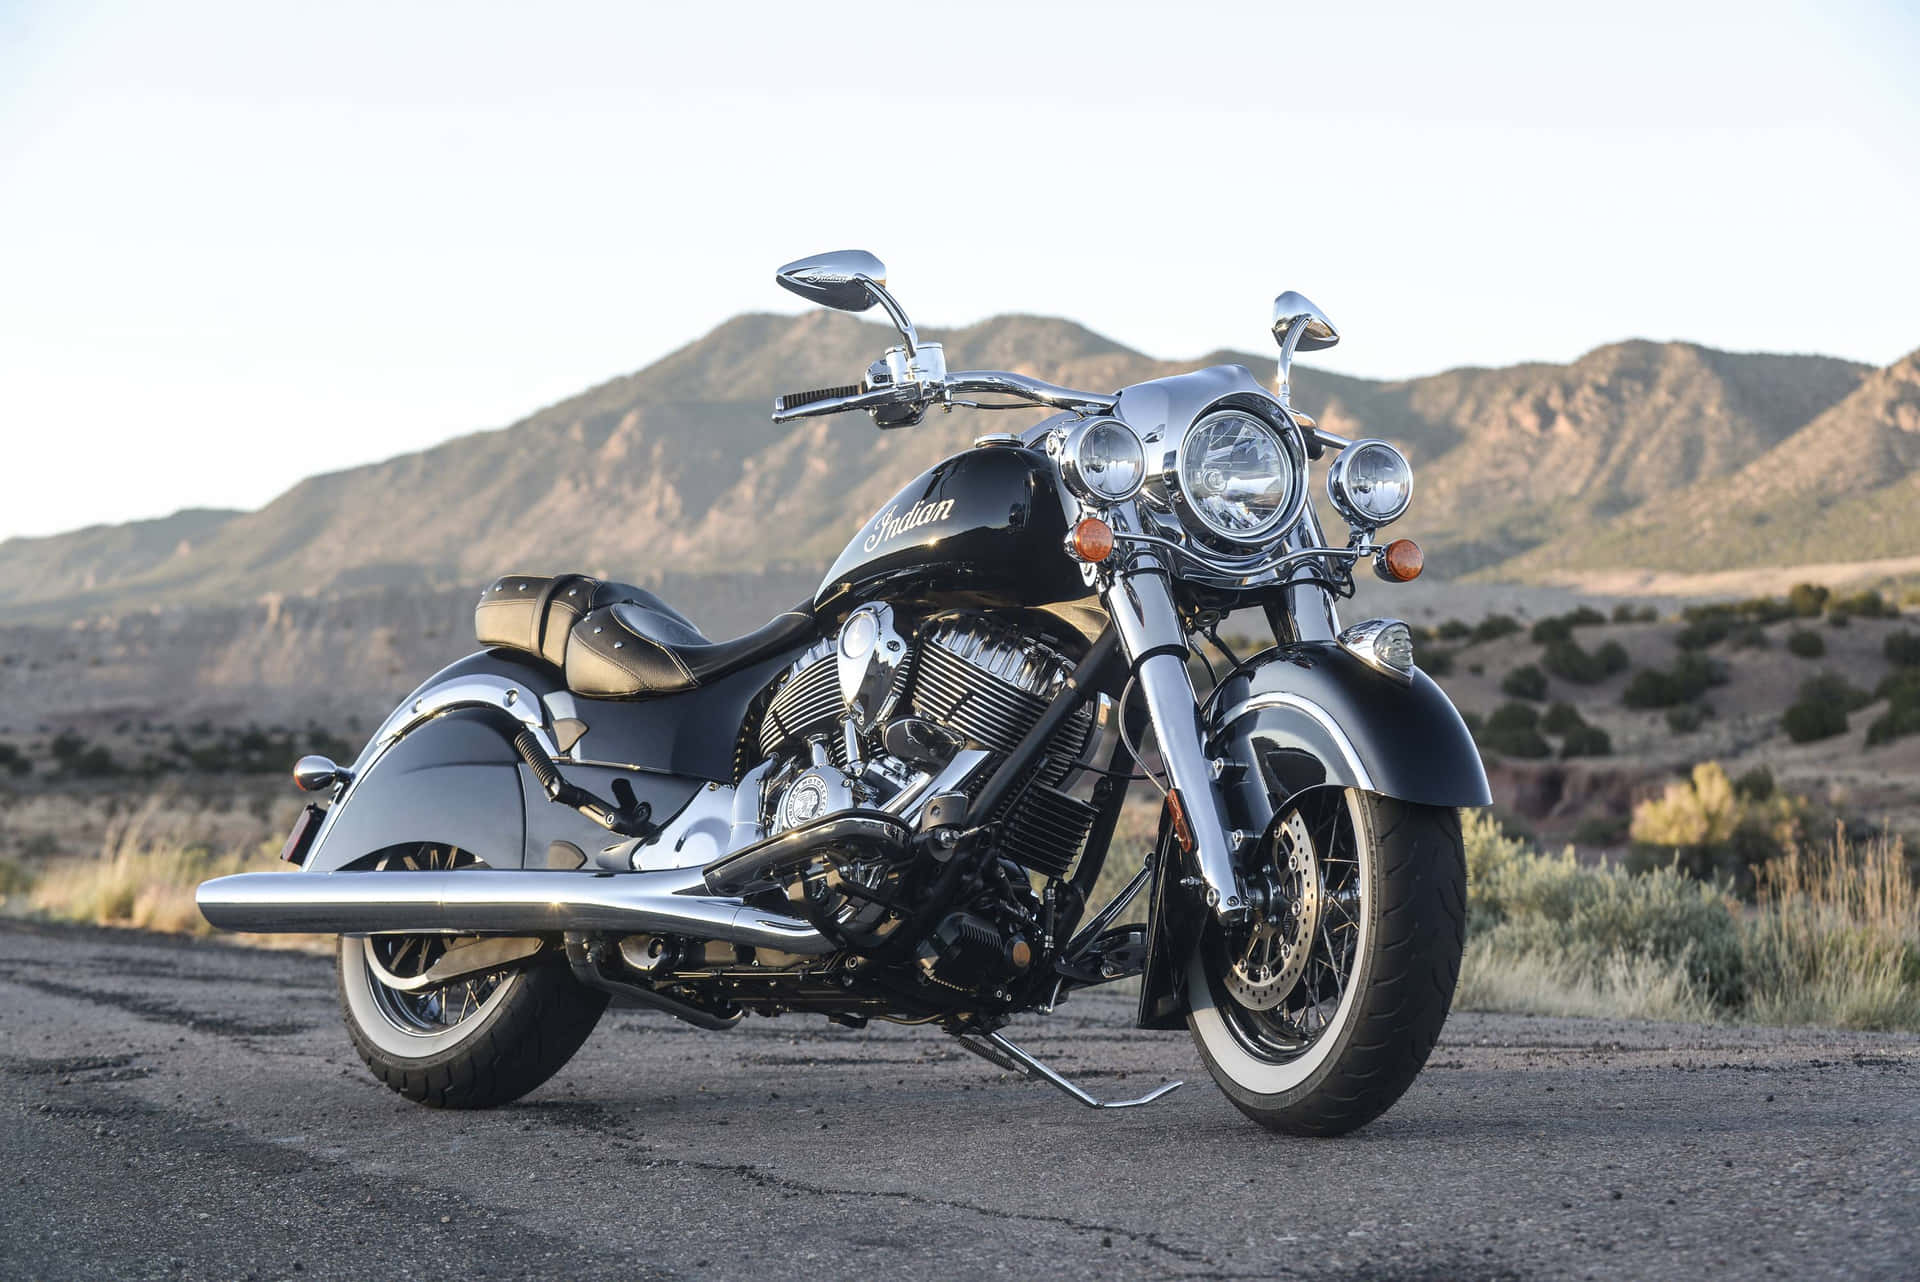 Riding With Freedom - The Majestic Indian Motorcycle Wallpaper